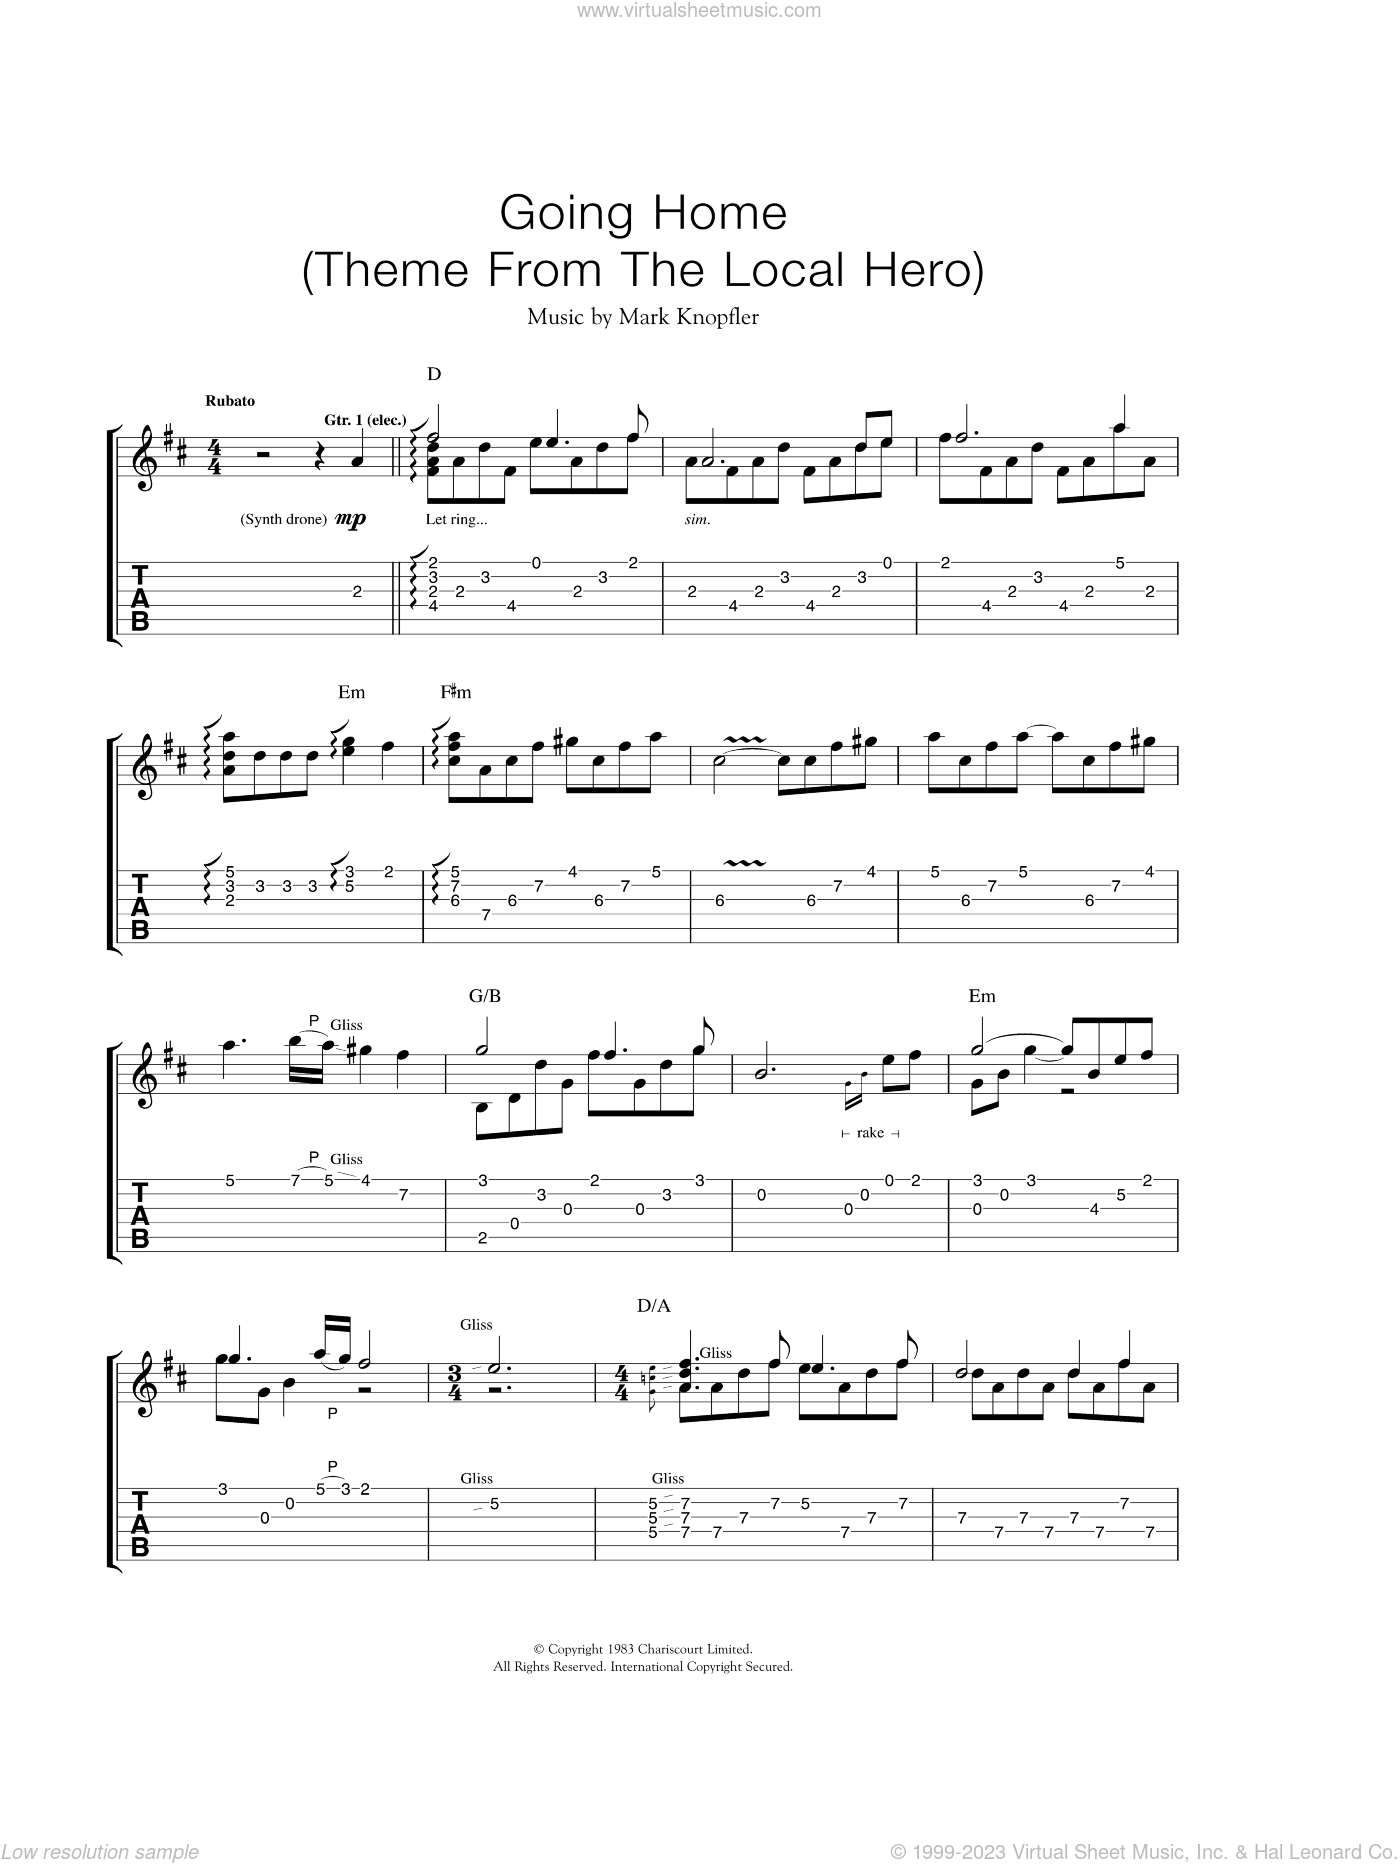 Knopfler - Going Home (Theme From "Local Hero") sheet music for guitar